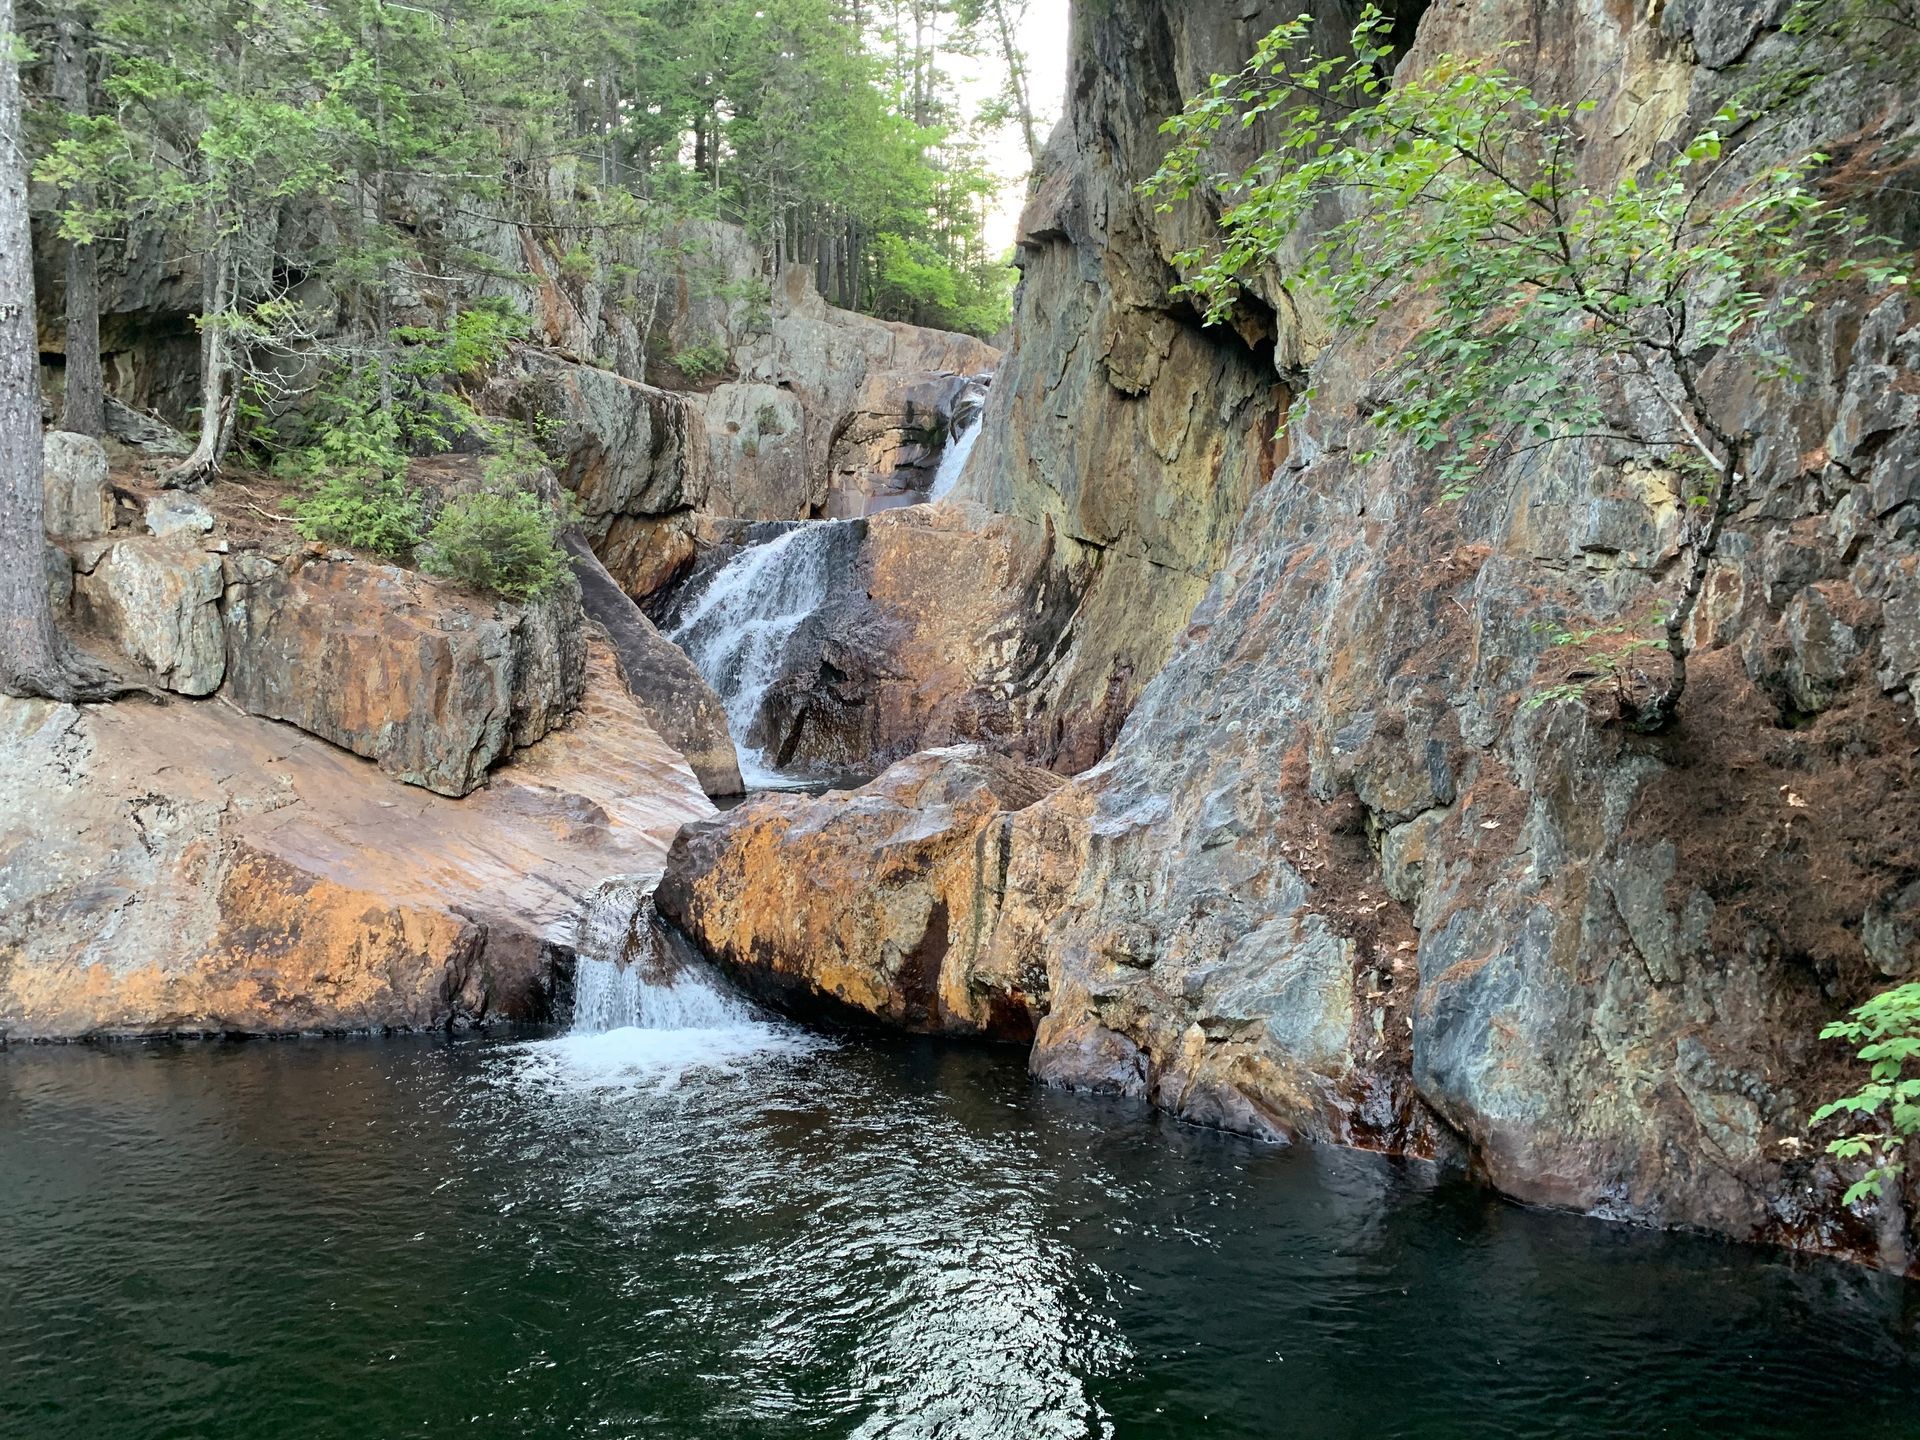 A waterfall is surrounded by rocks and trees and is surrounded by a body of water.